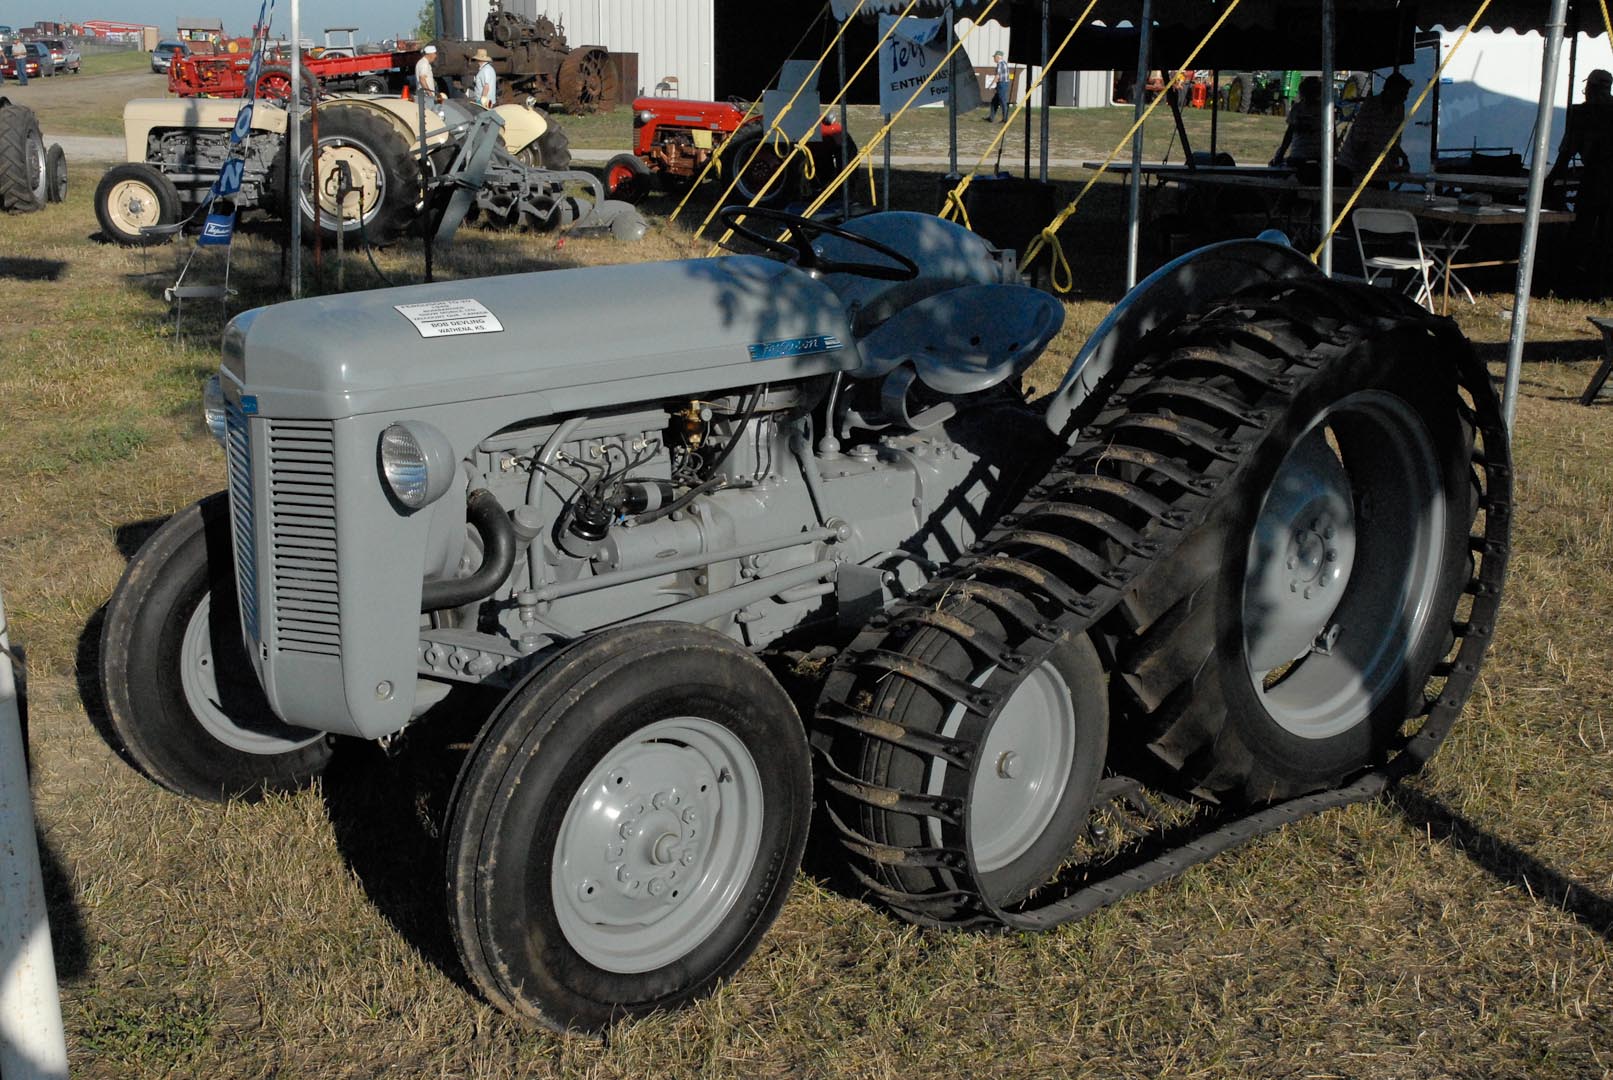 Bob Devling of Wathena, Kansas brought this 1949 Ferguson TO-20 with the A-TE-113 Ferguson Bombardier track. This bit of equipment gave the tractor half-track capability for handling sloshy terrain.